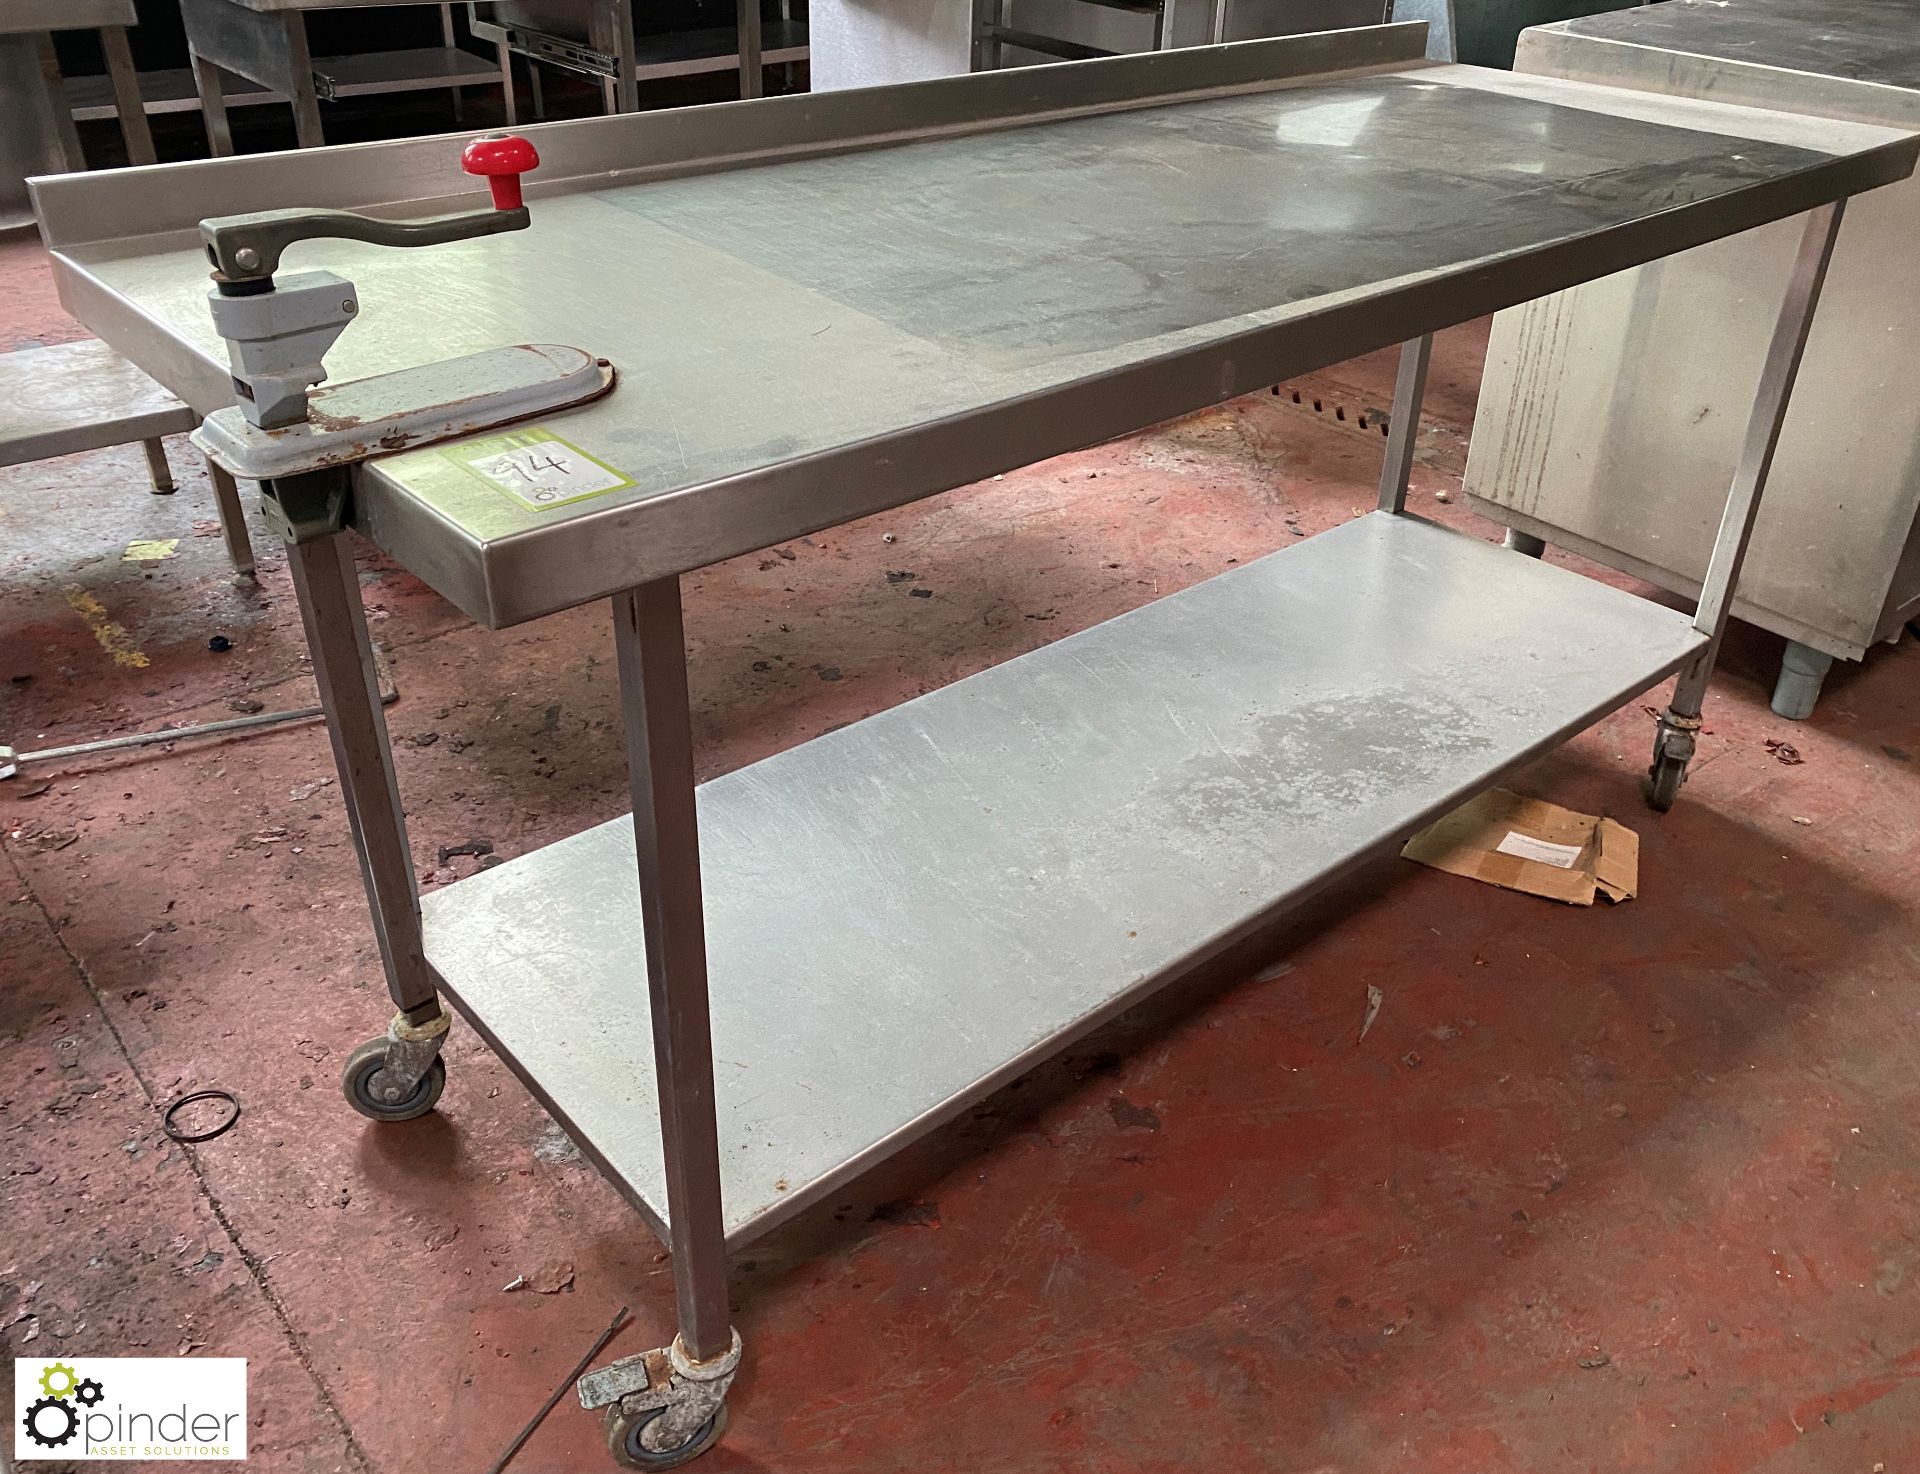 Mobile Preparation Table, 1800mm x 700mm x 870mm, with under shelf and can opener - Image 2 of 4